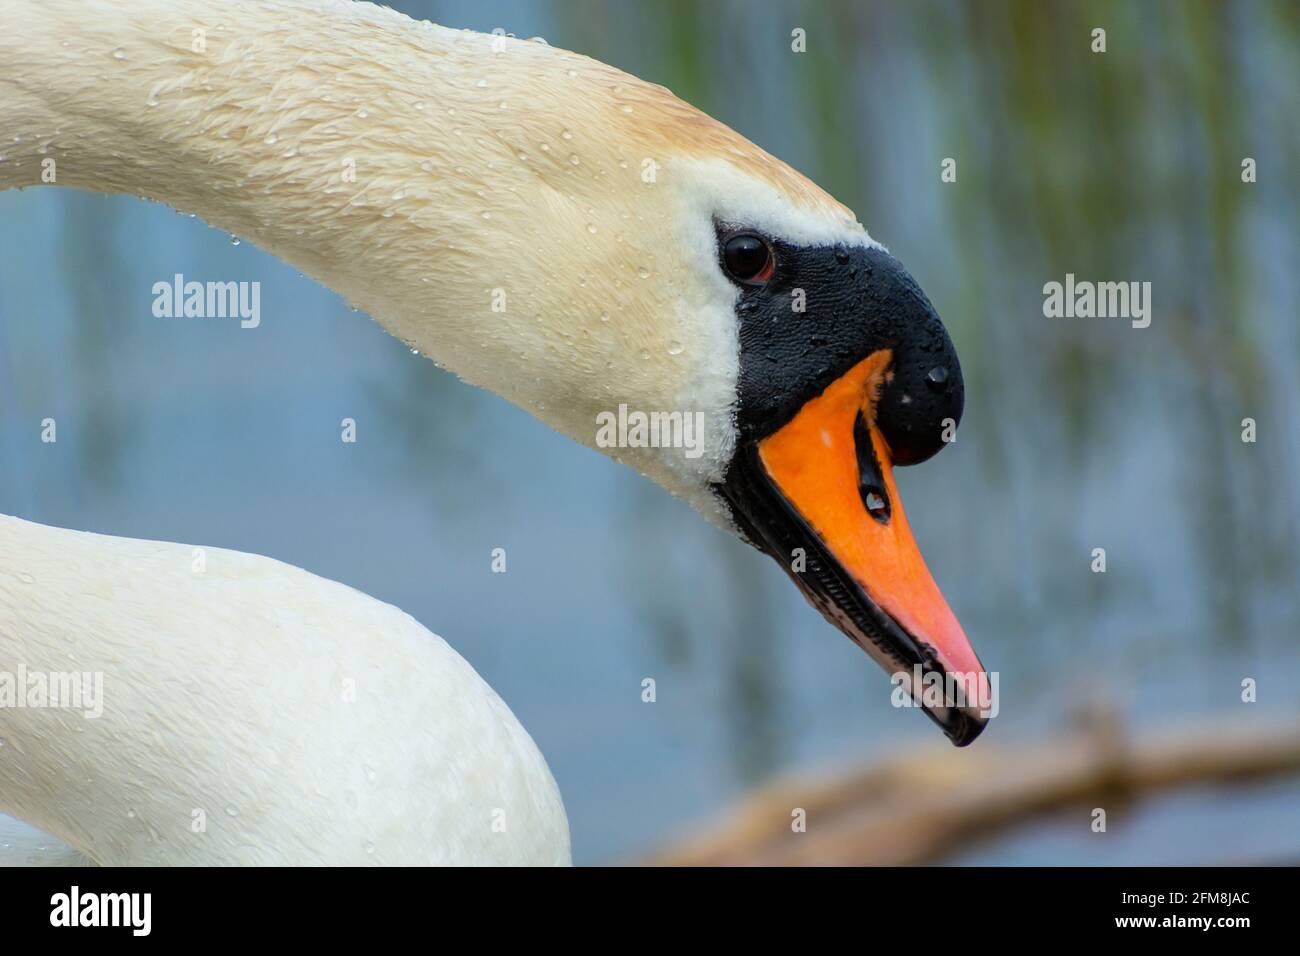 Close-up of the head and neck of a white swan Stock Photo